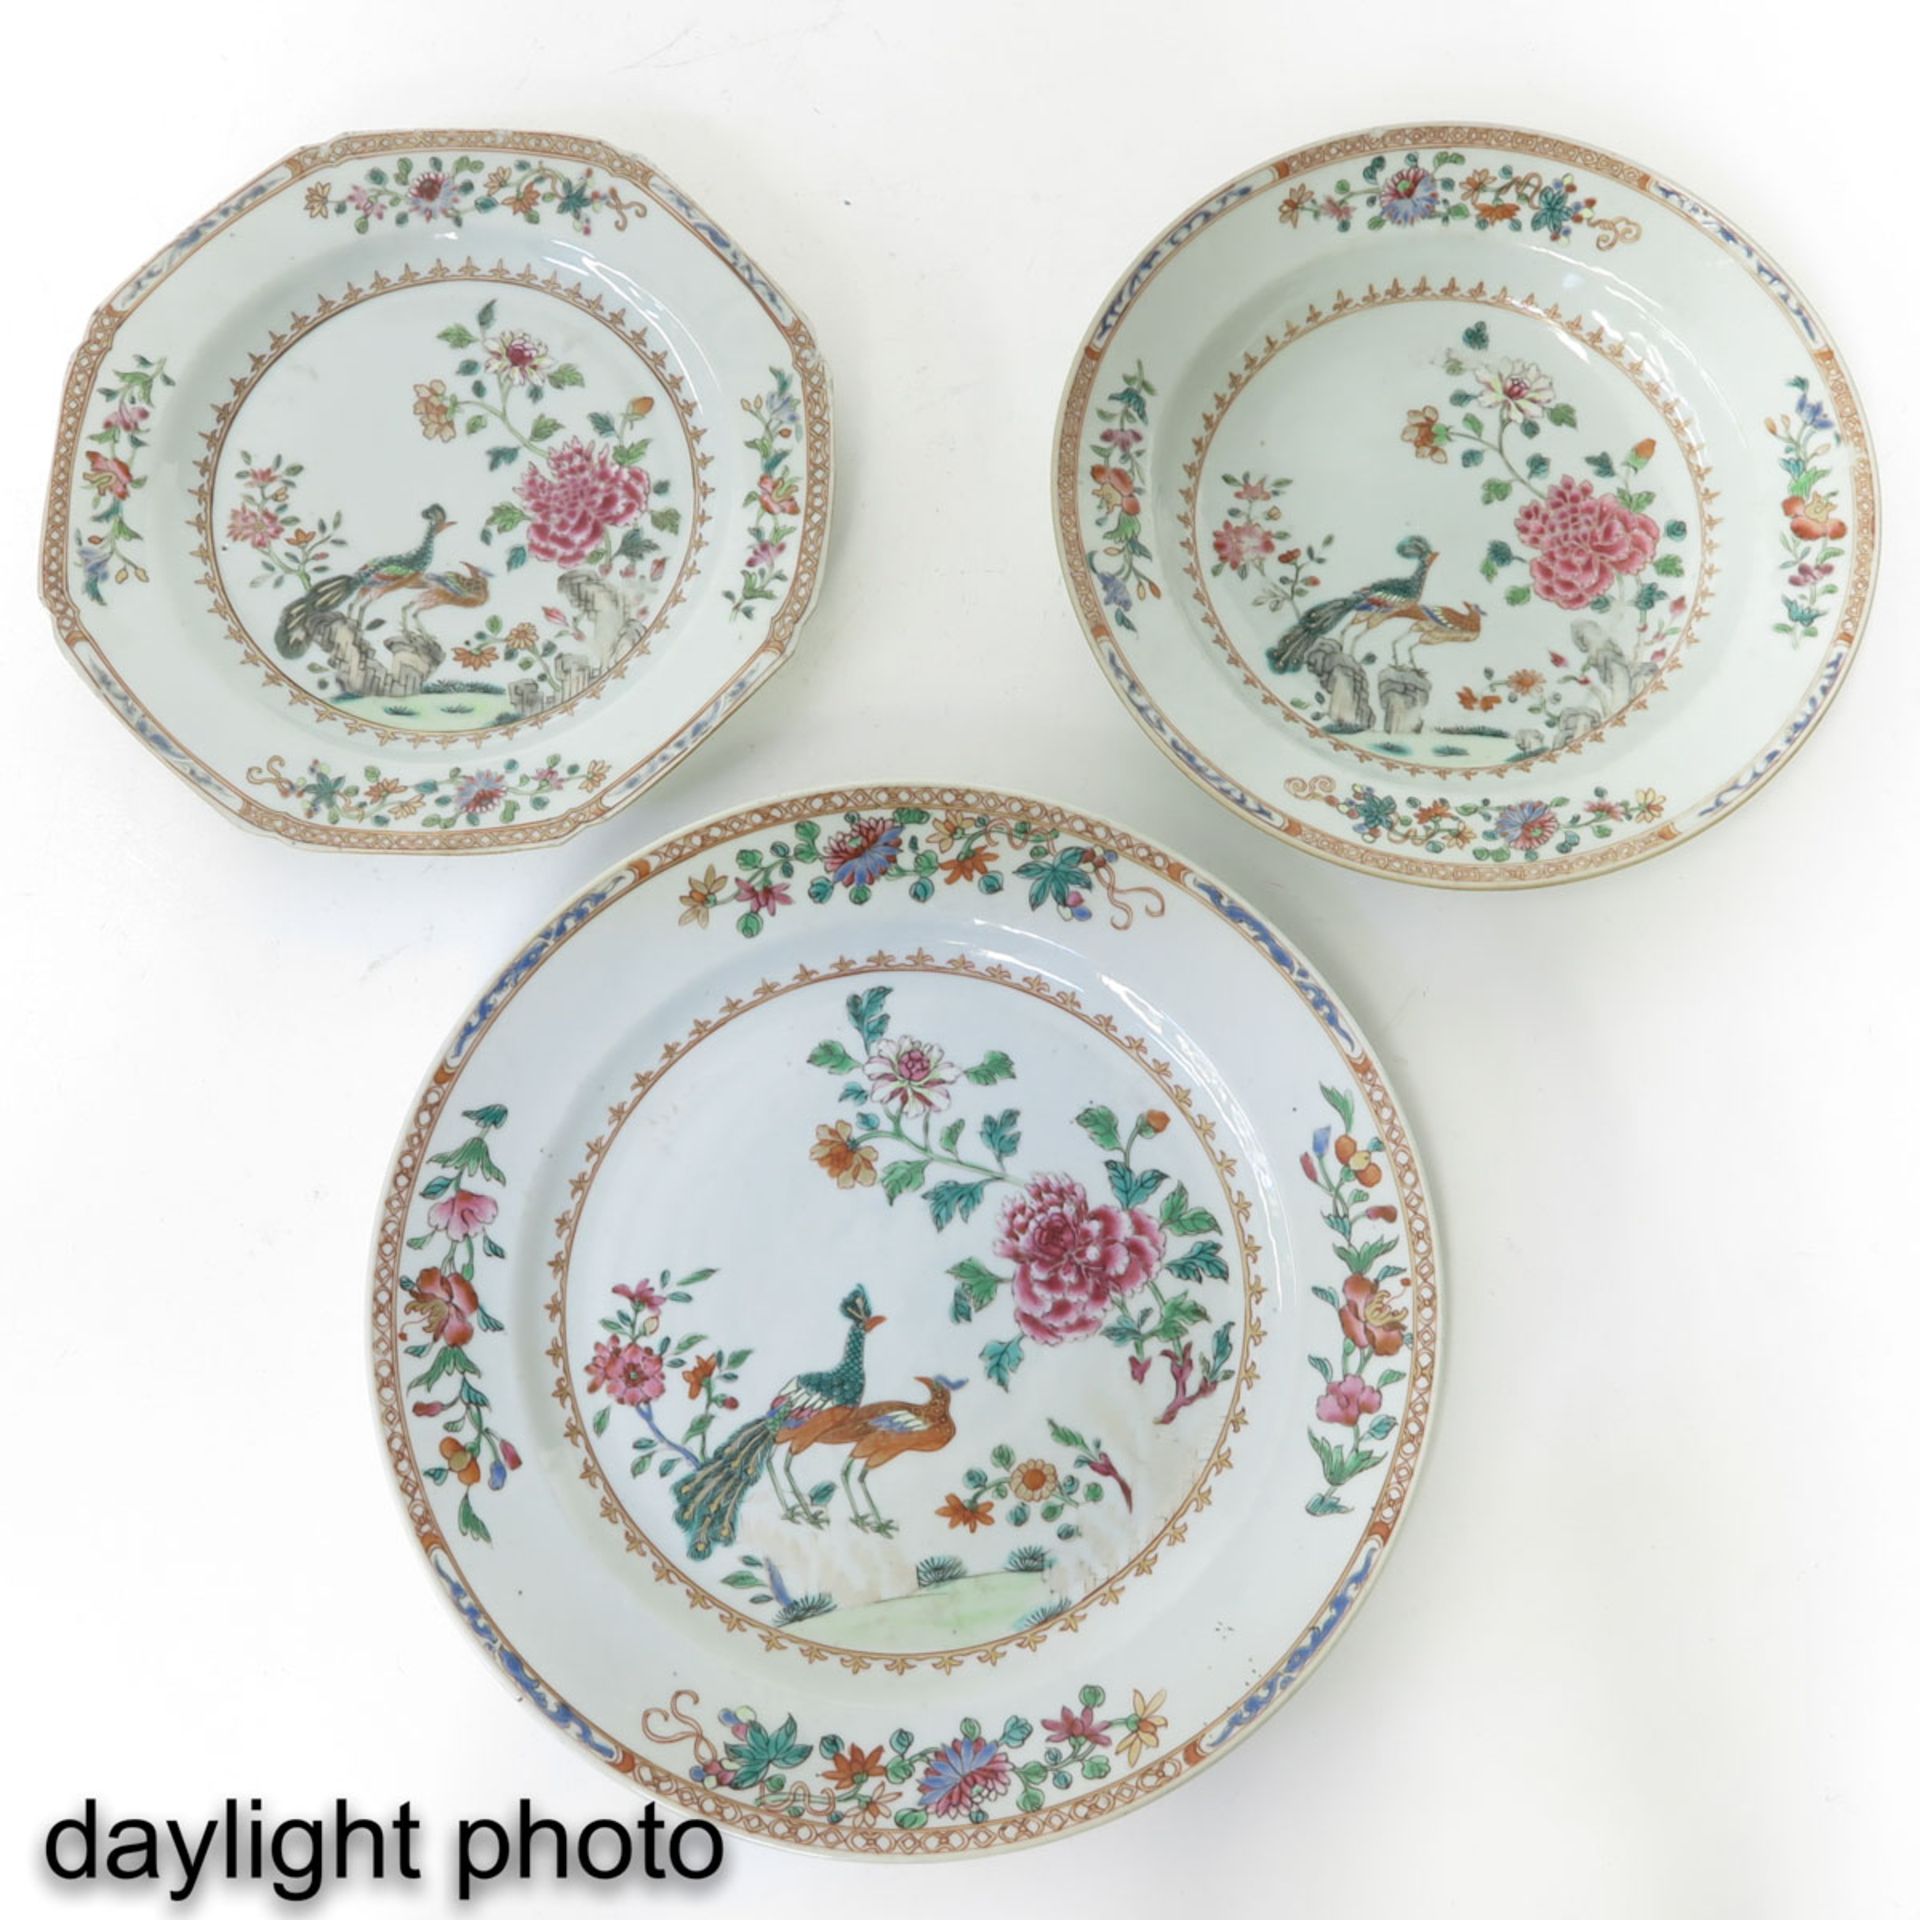 A Collection of 3 Famille Rose Plates - Image 9 of 10